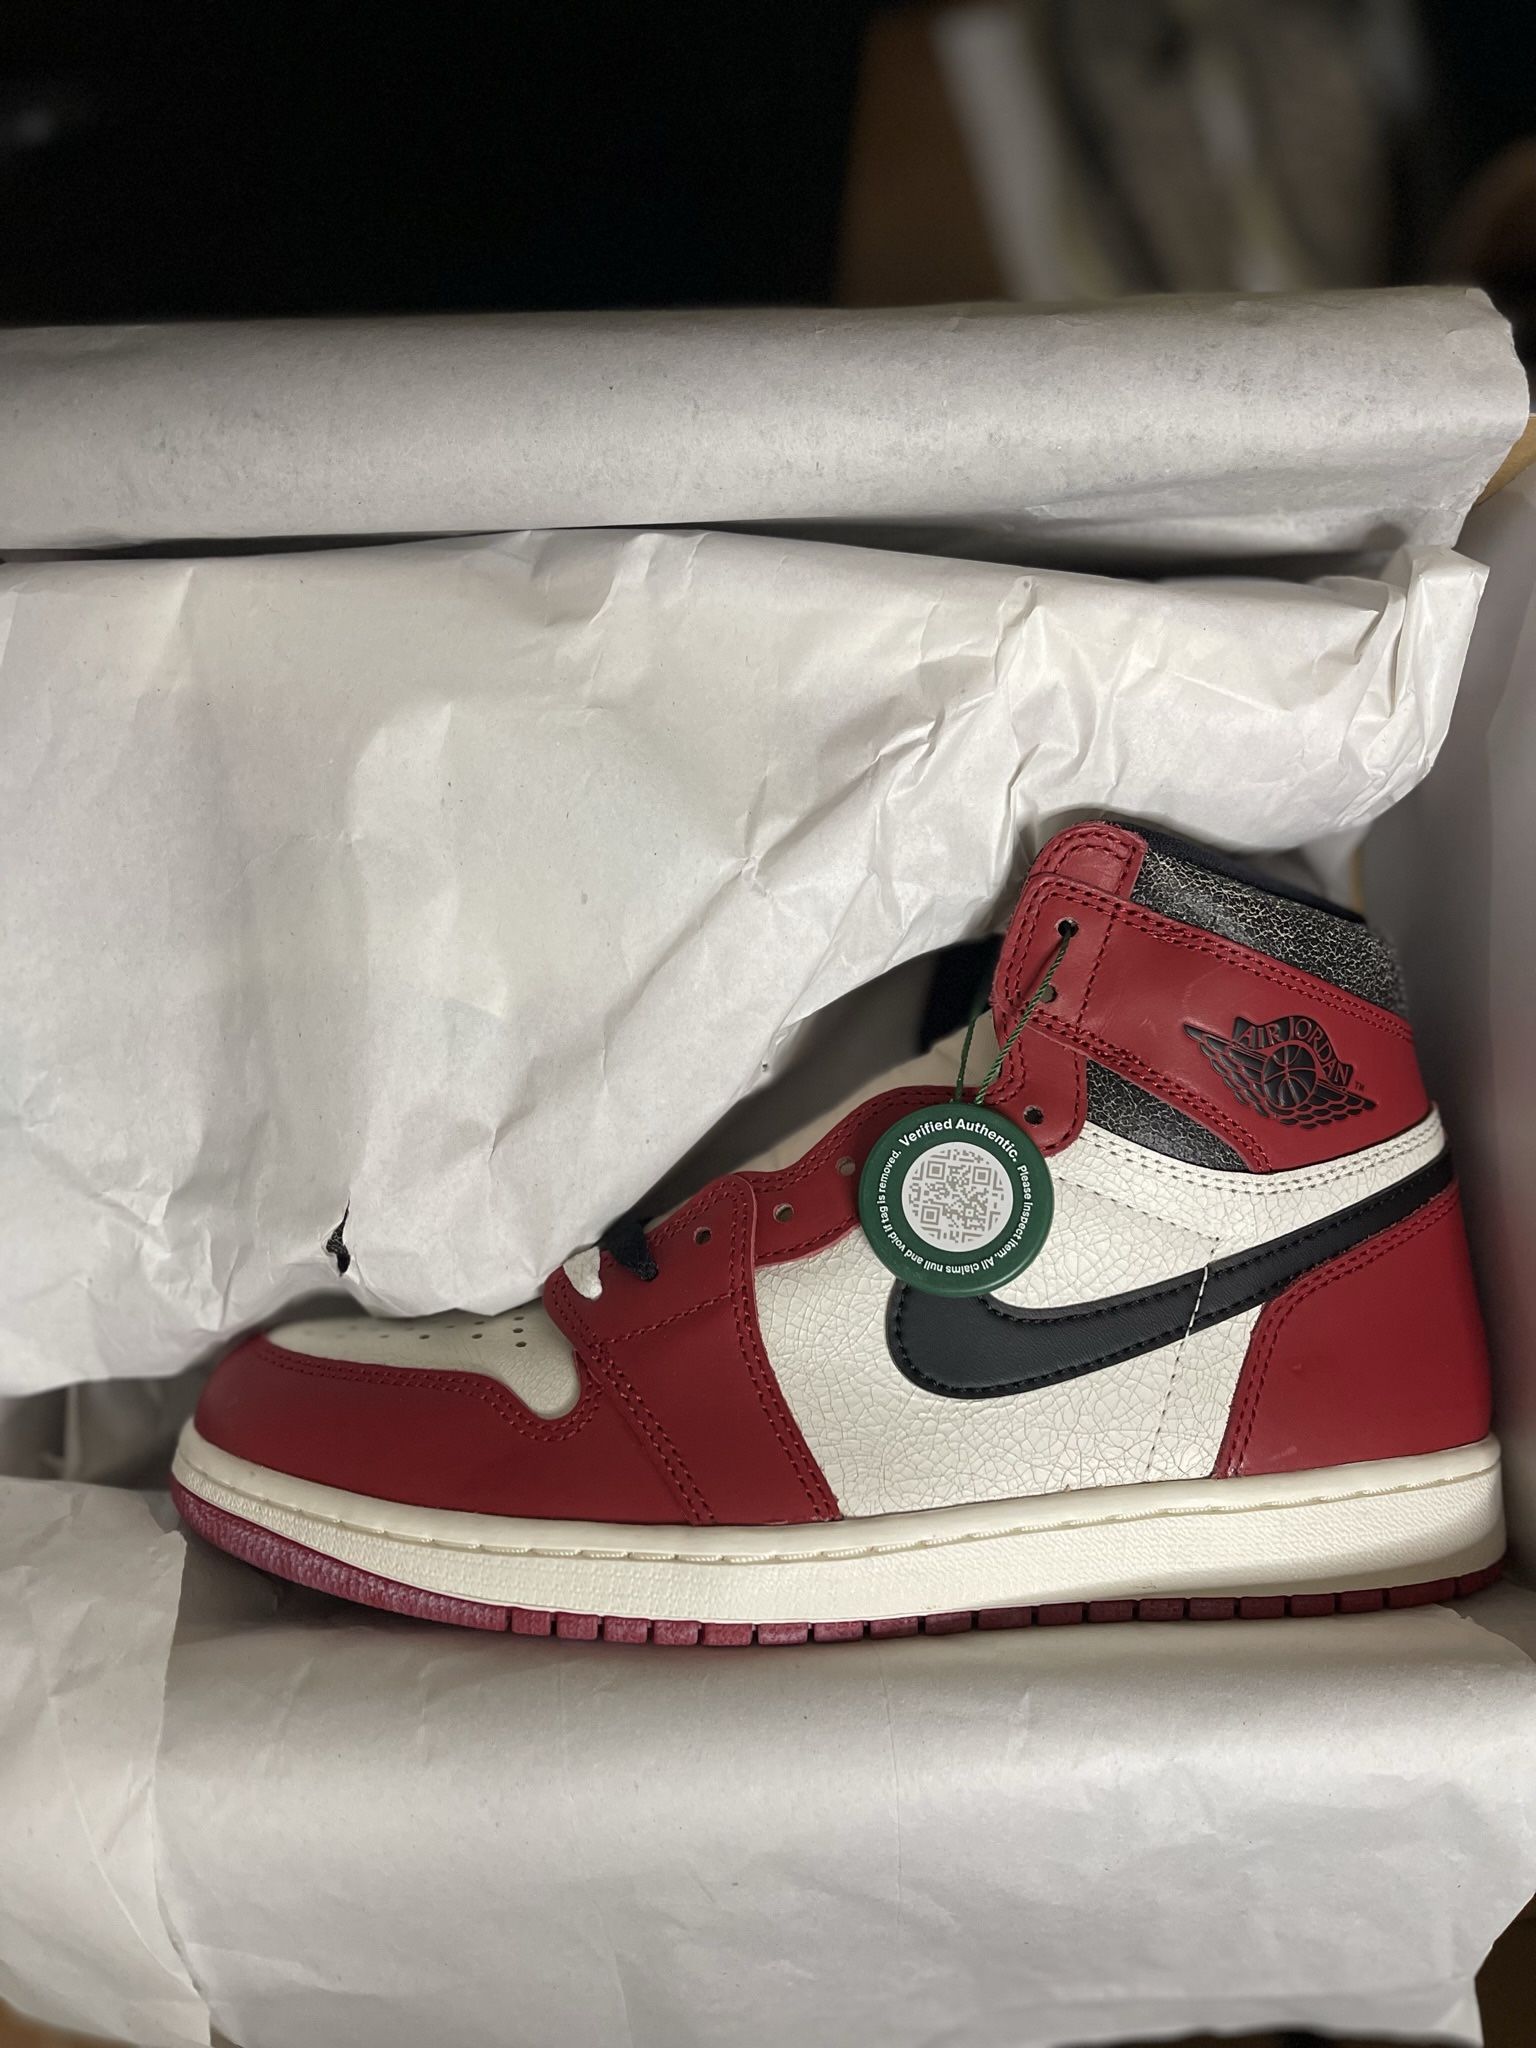 Jordan 1 lost And Found Size 10 